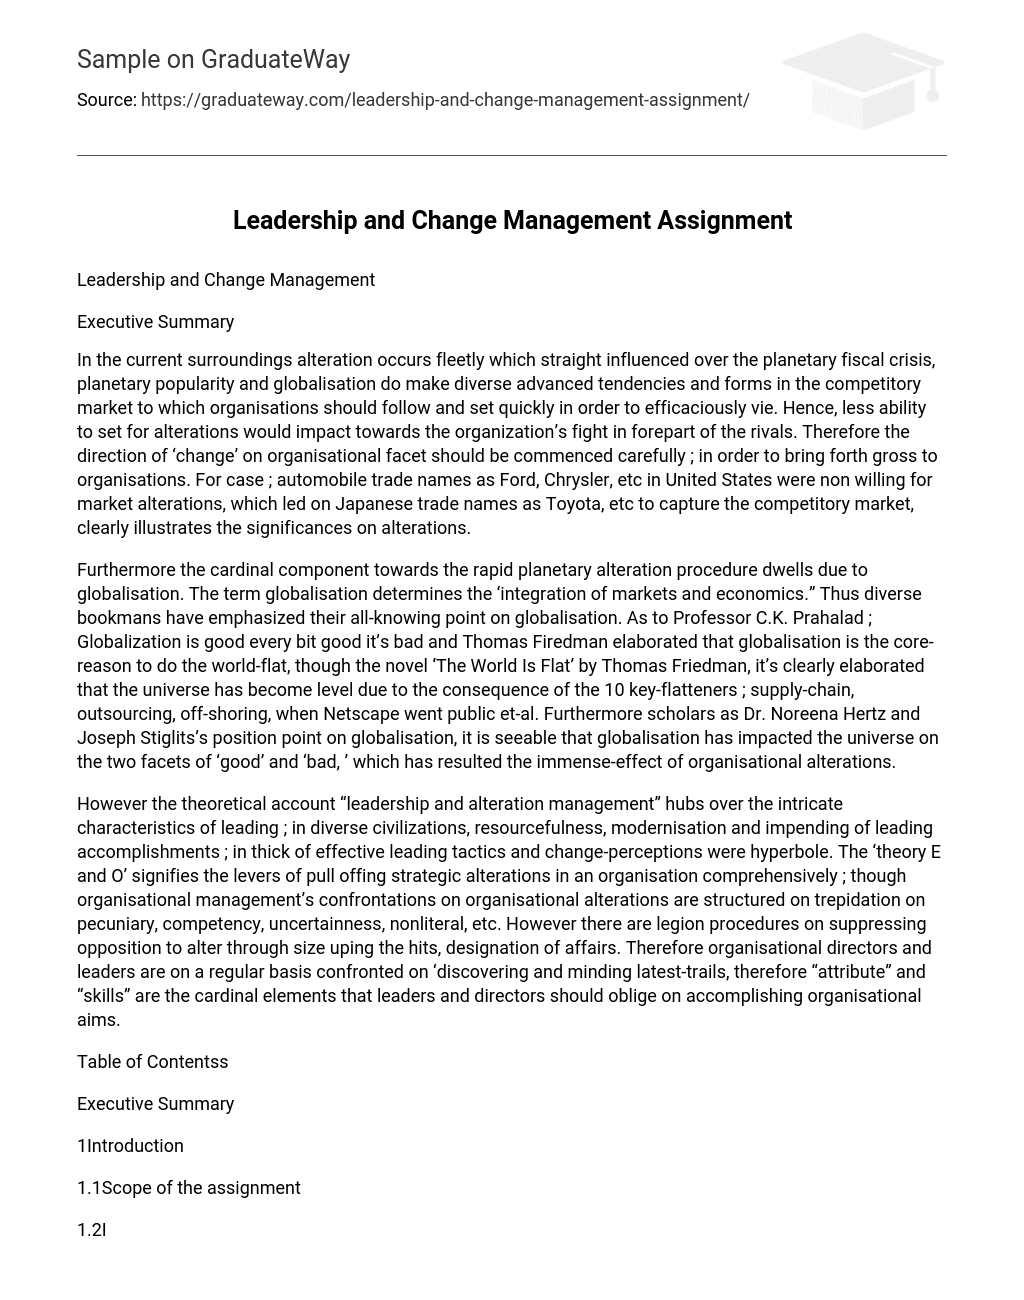 Leadership and Change Management Assignment